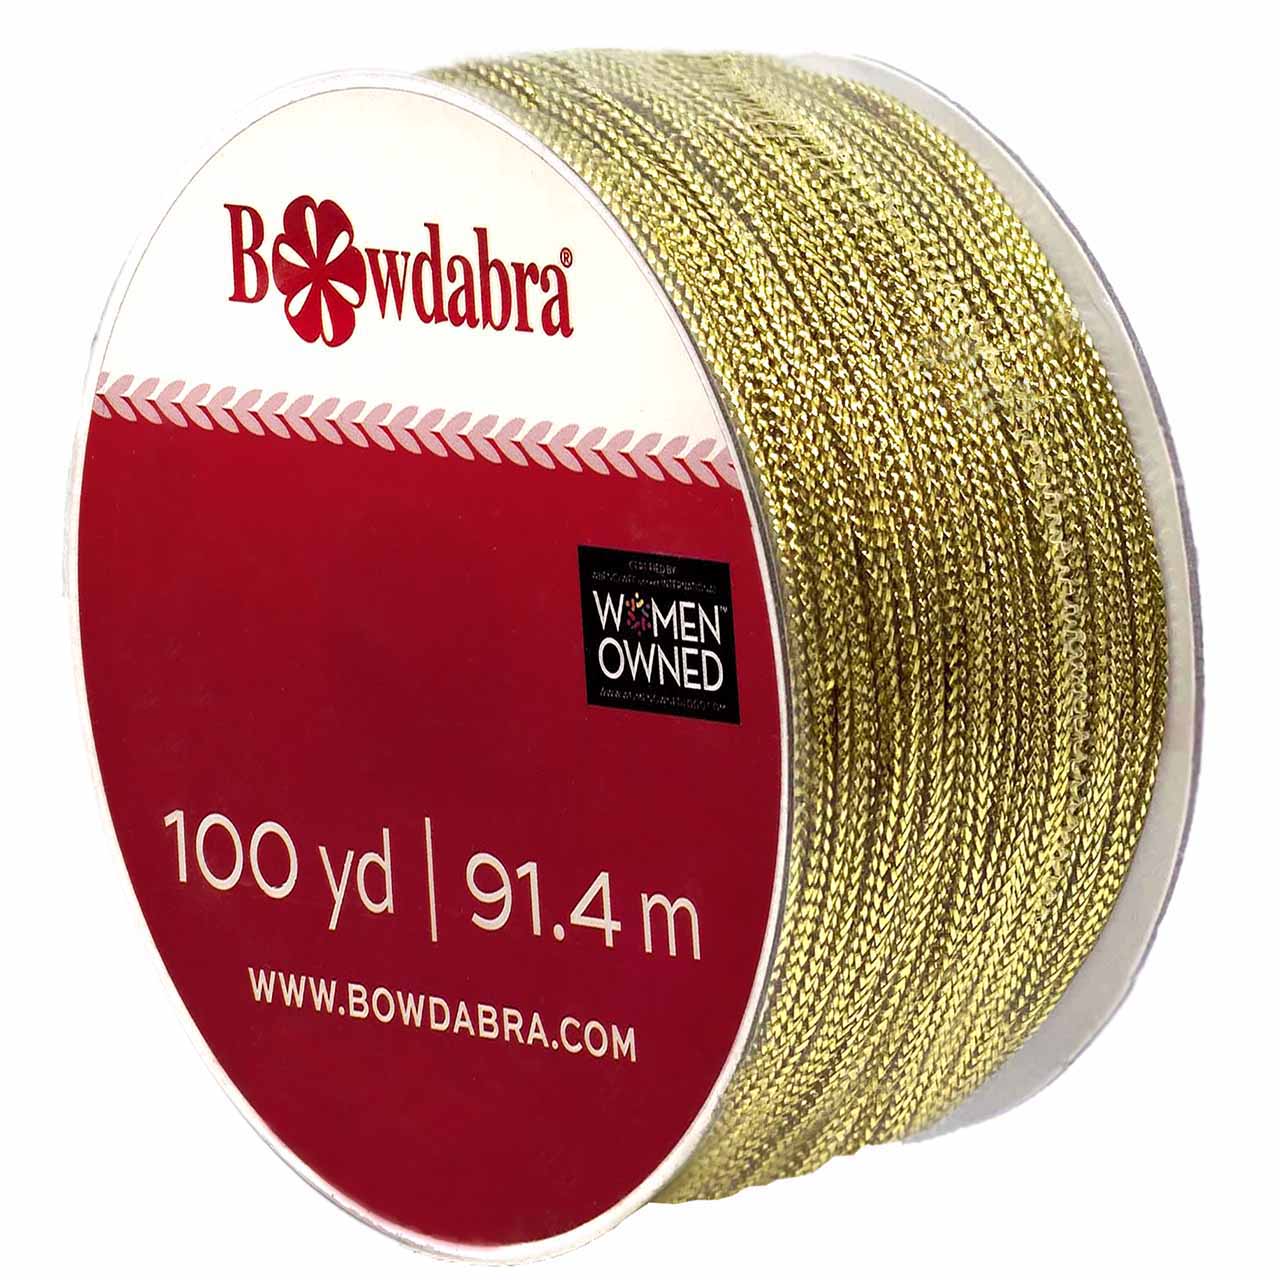 Buy Gold Bow Wire Online: Bowdabra Crafting Bow Wire Value Pack